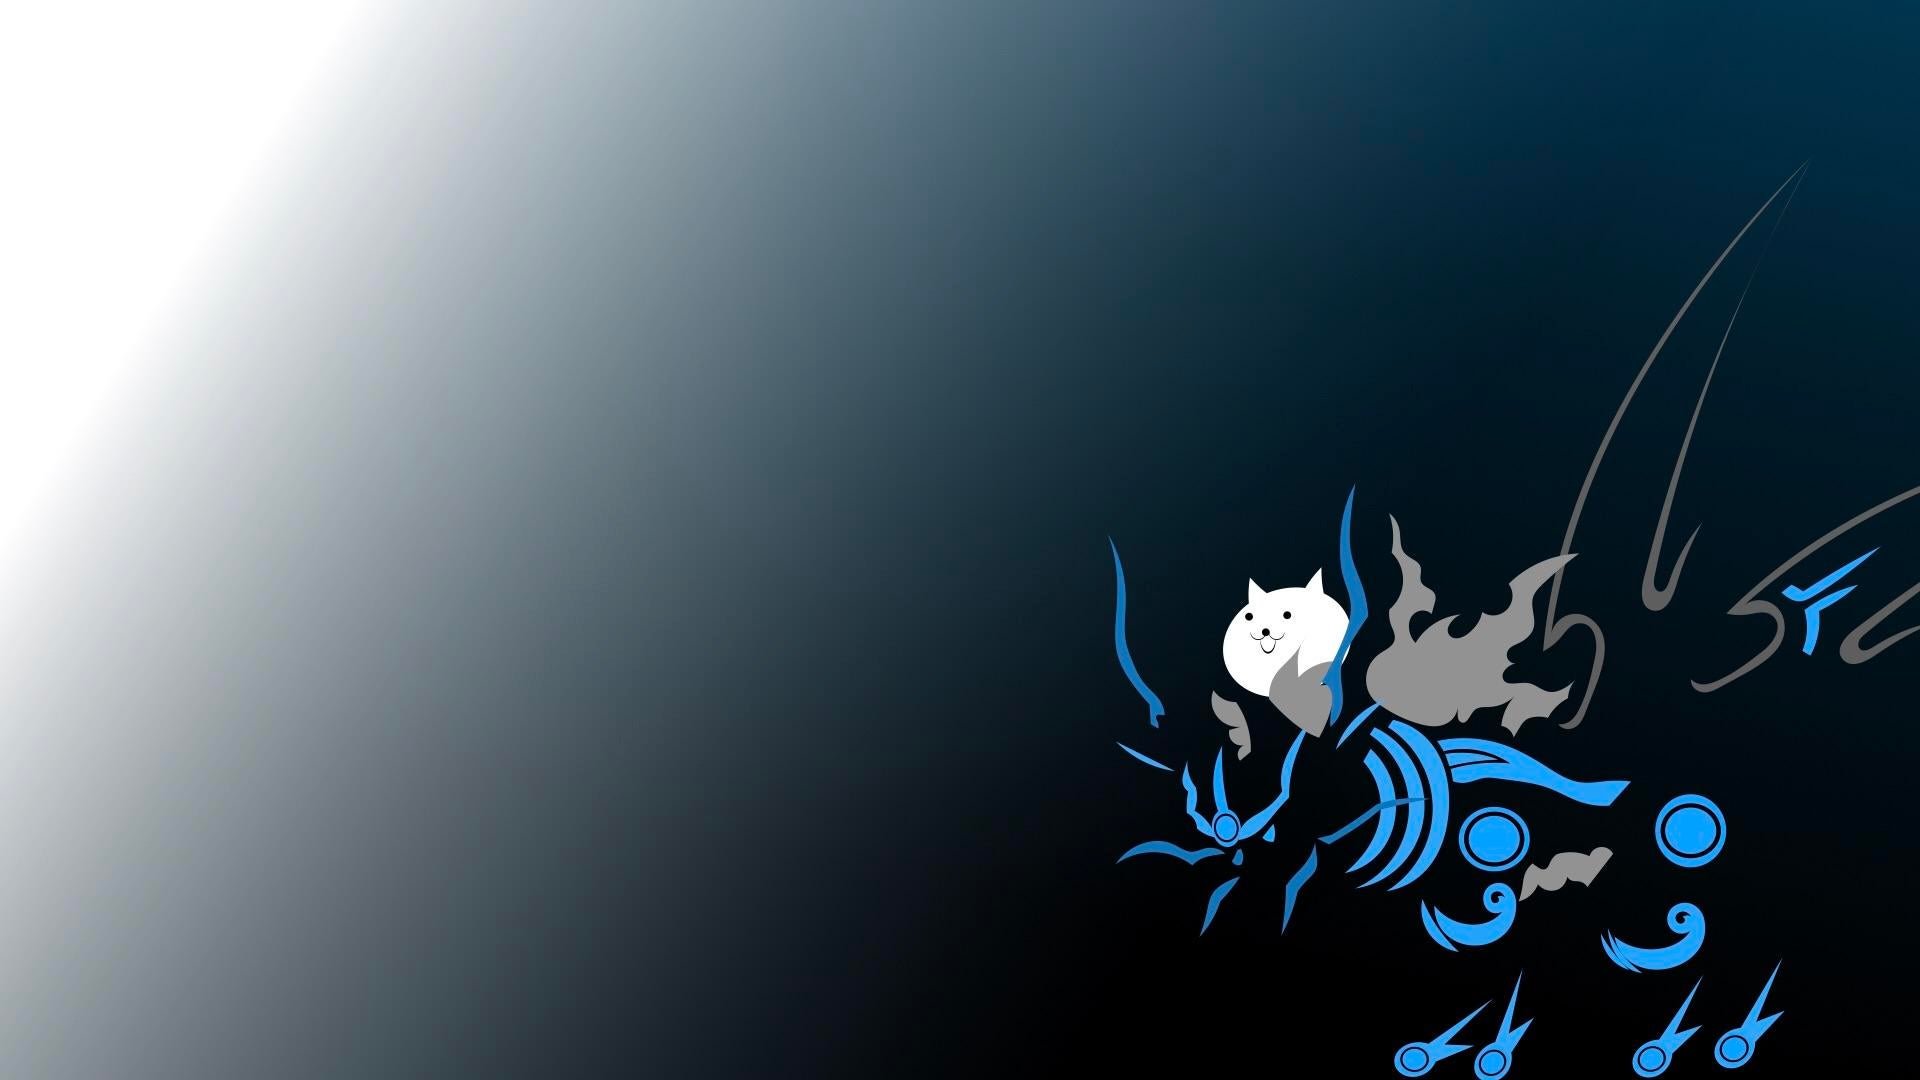 FAN MADE Shadow Gao Wallpaper(?) I'll Be Adding A Mitama On The Left. Feel Free To Give Me Any Feedbacks! ;)